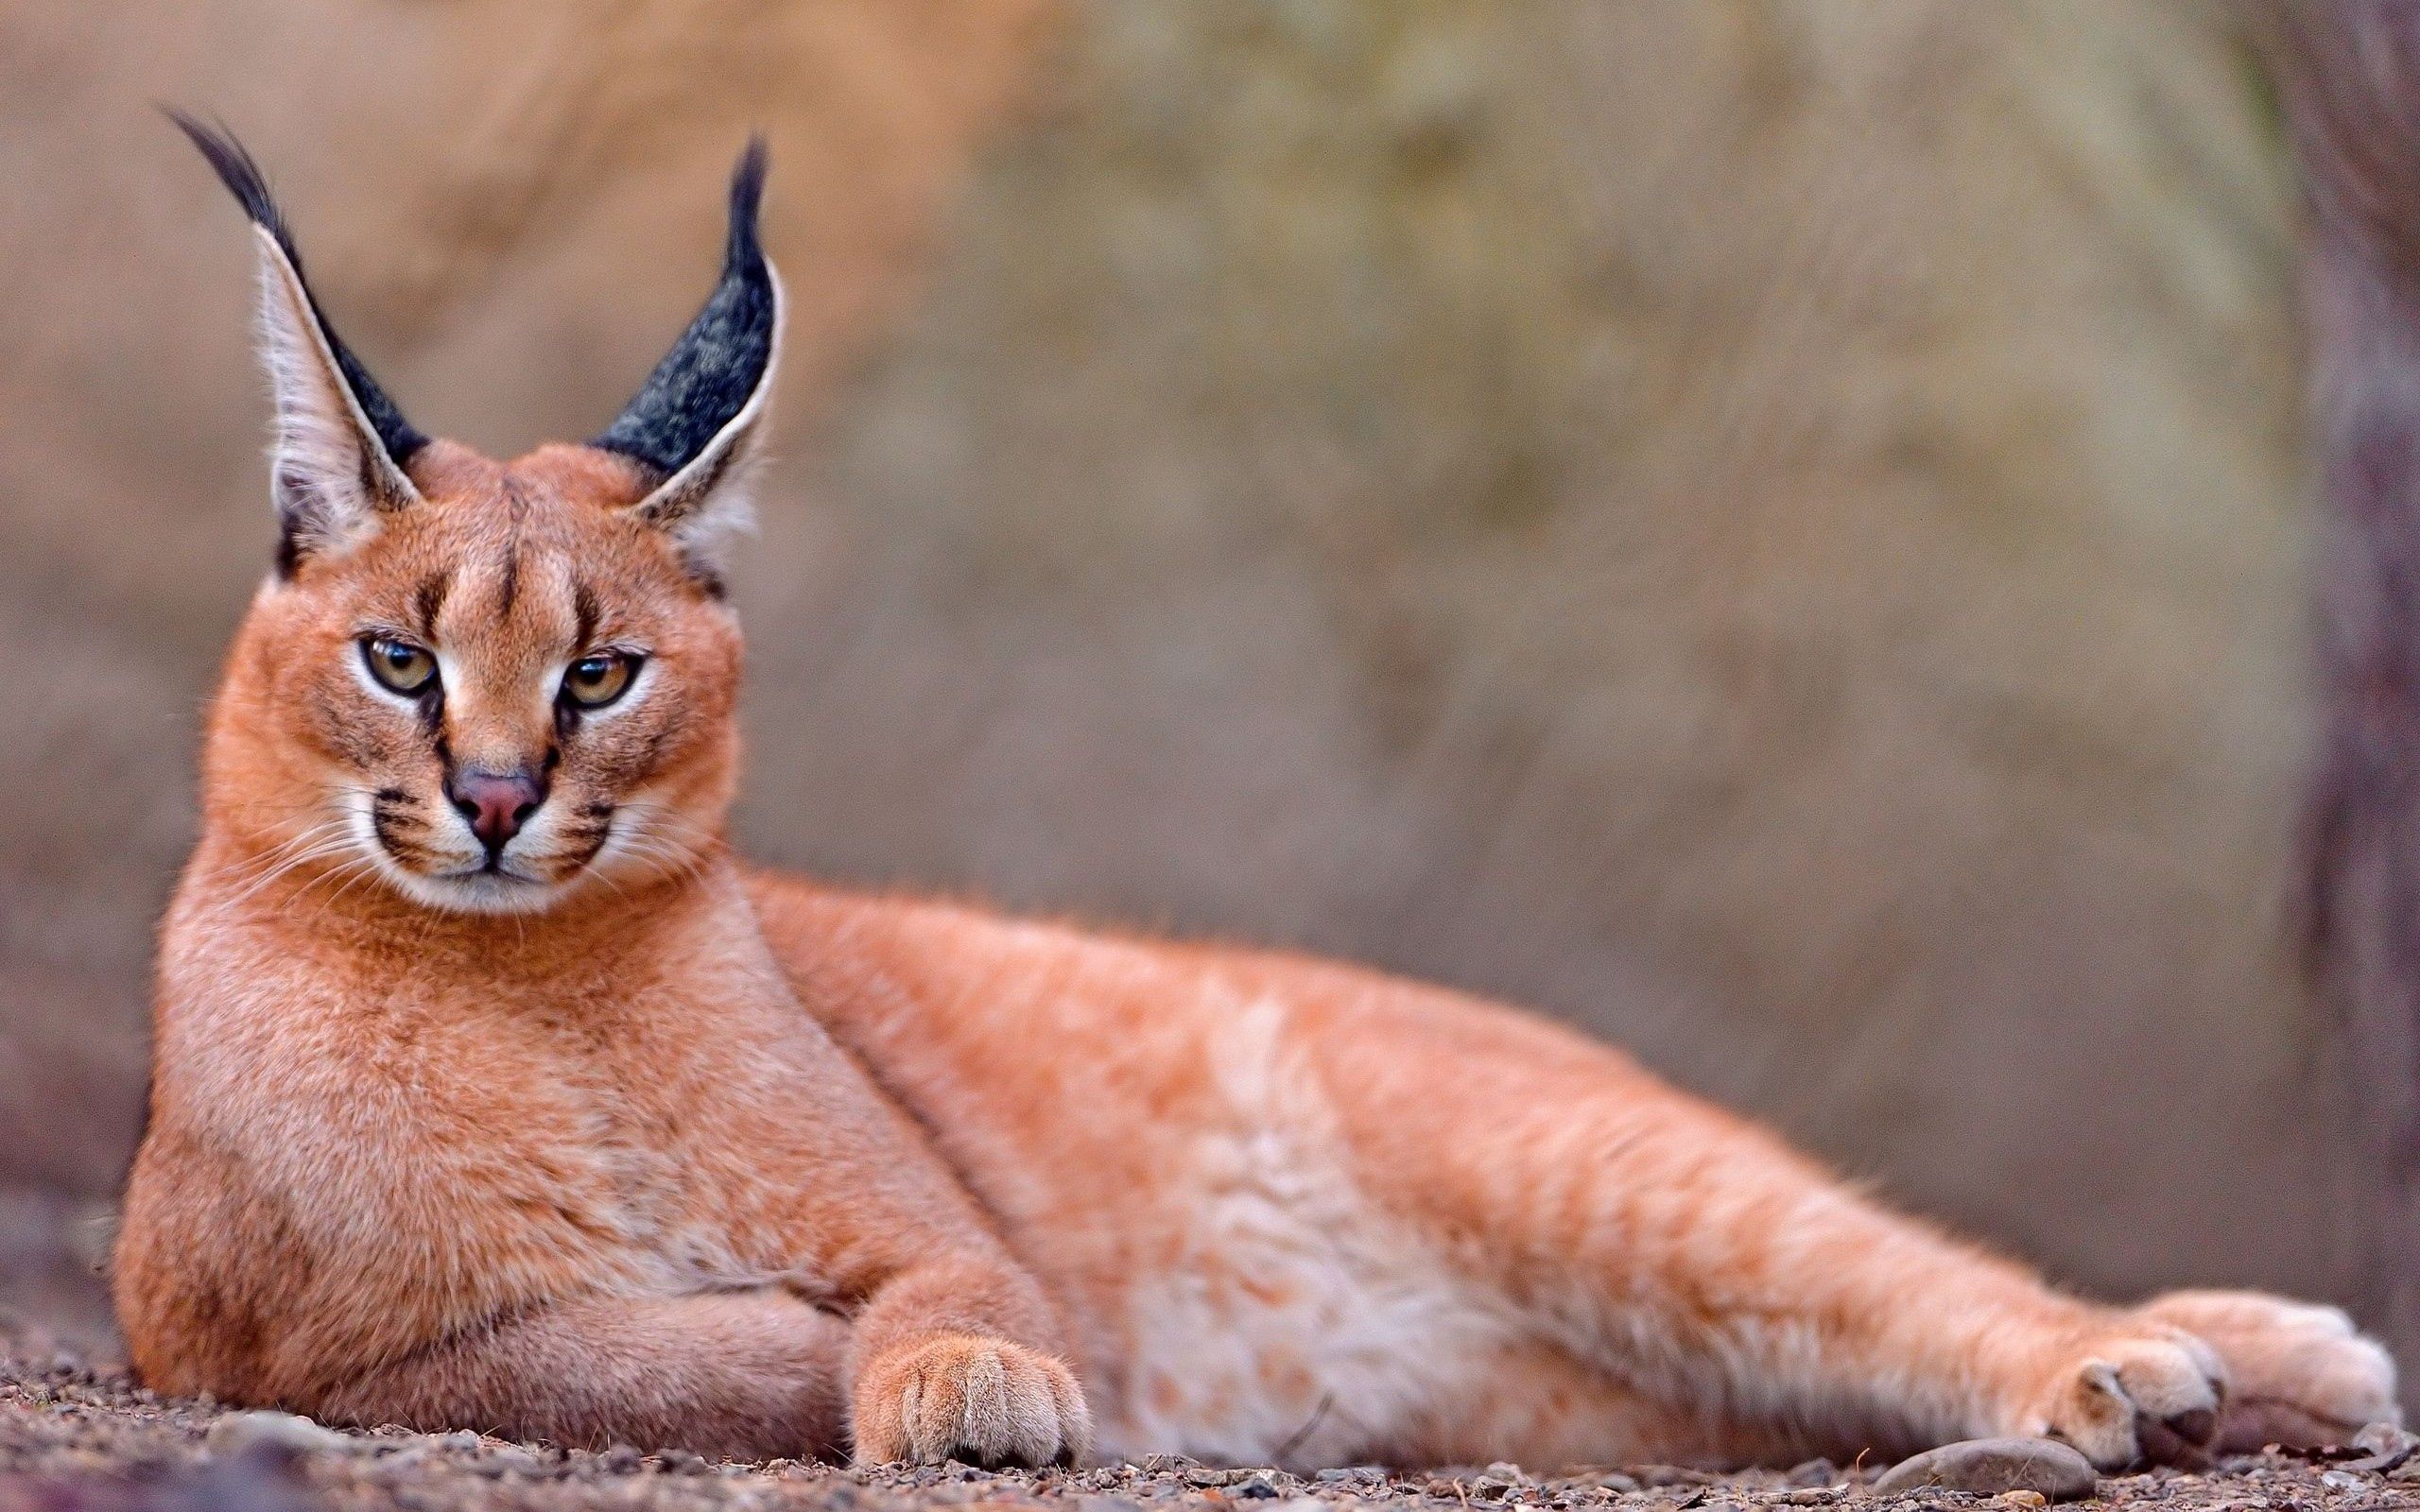 Cool Wallpapers animals, to lie down, lie, beautiful, relaxation, rest, caracal